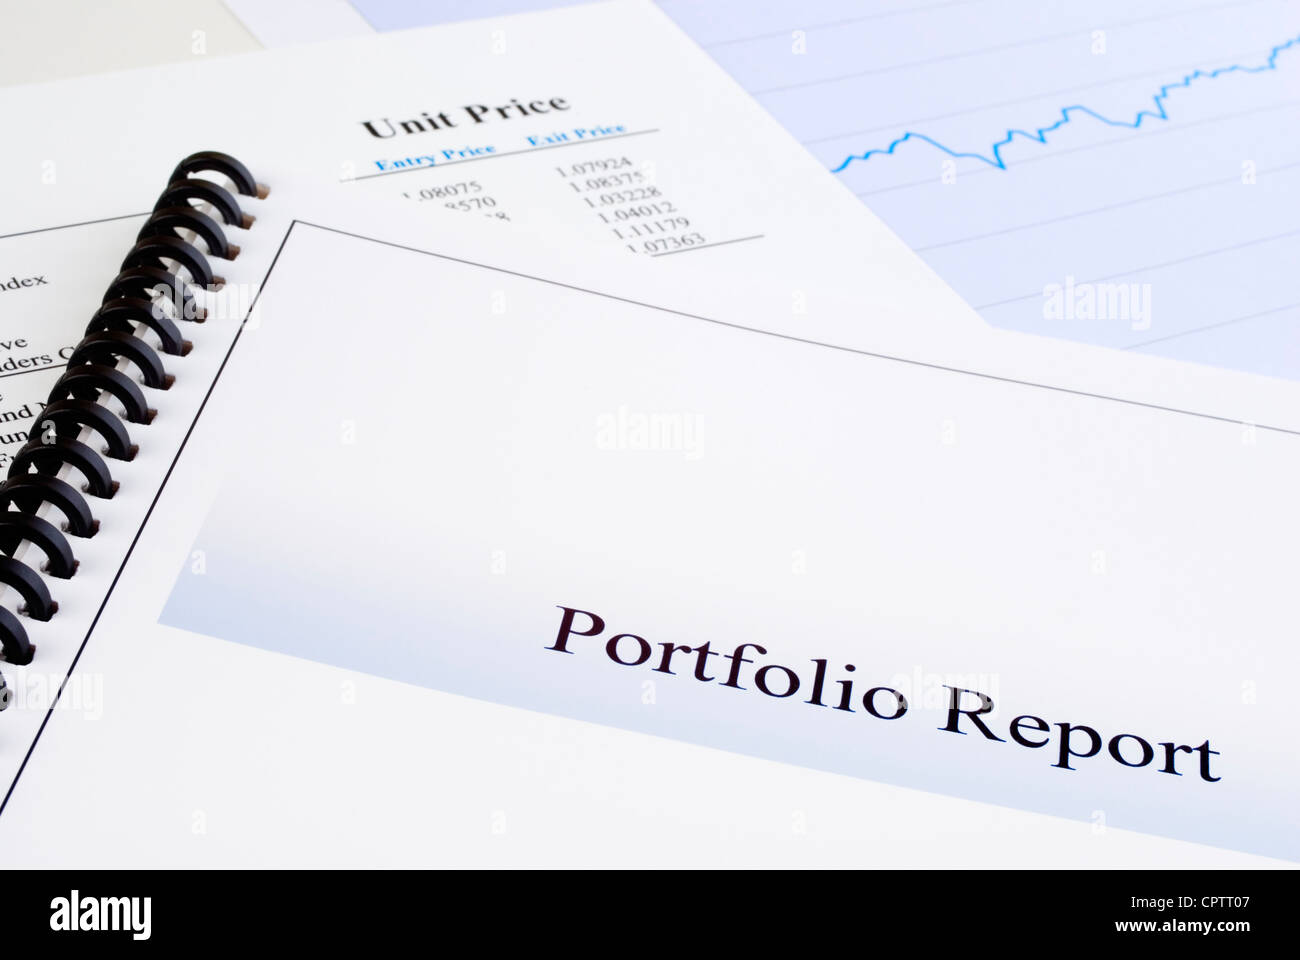 Portfolio Report, with unit trust information in background, and graph. Stock Photo